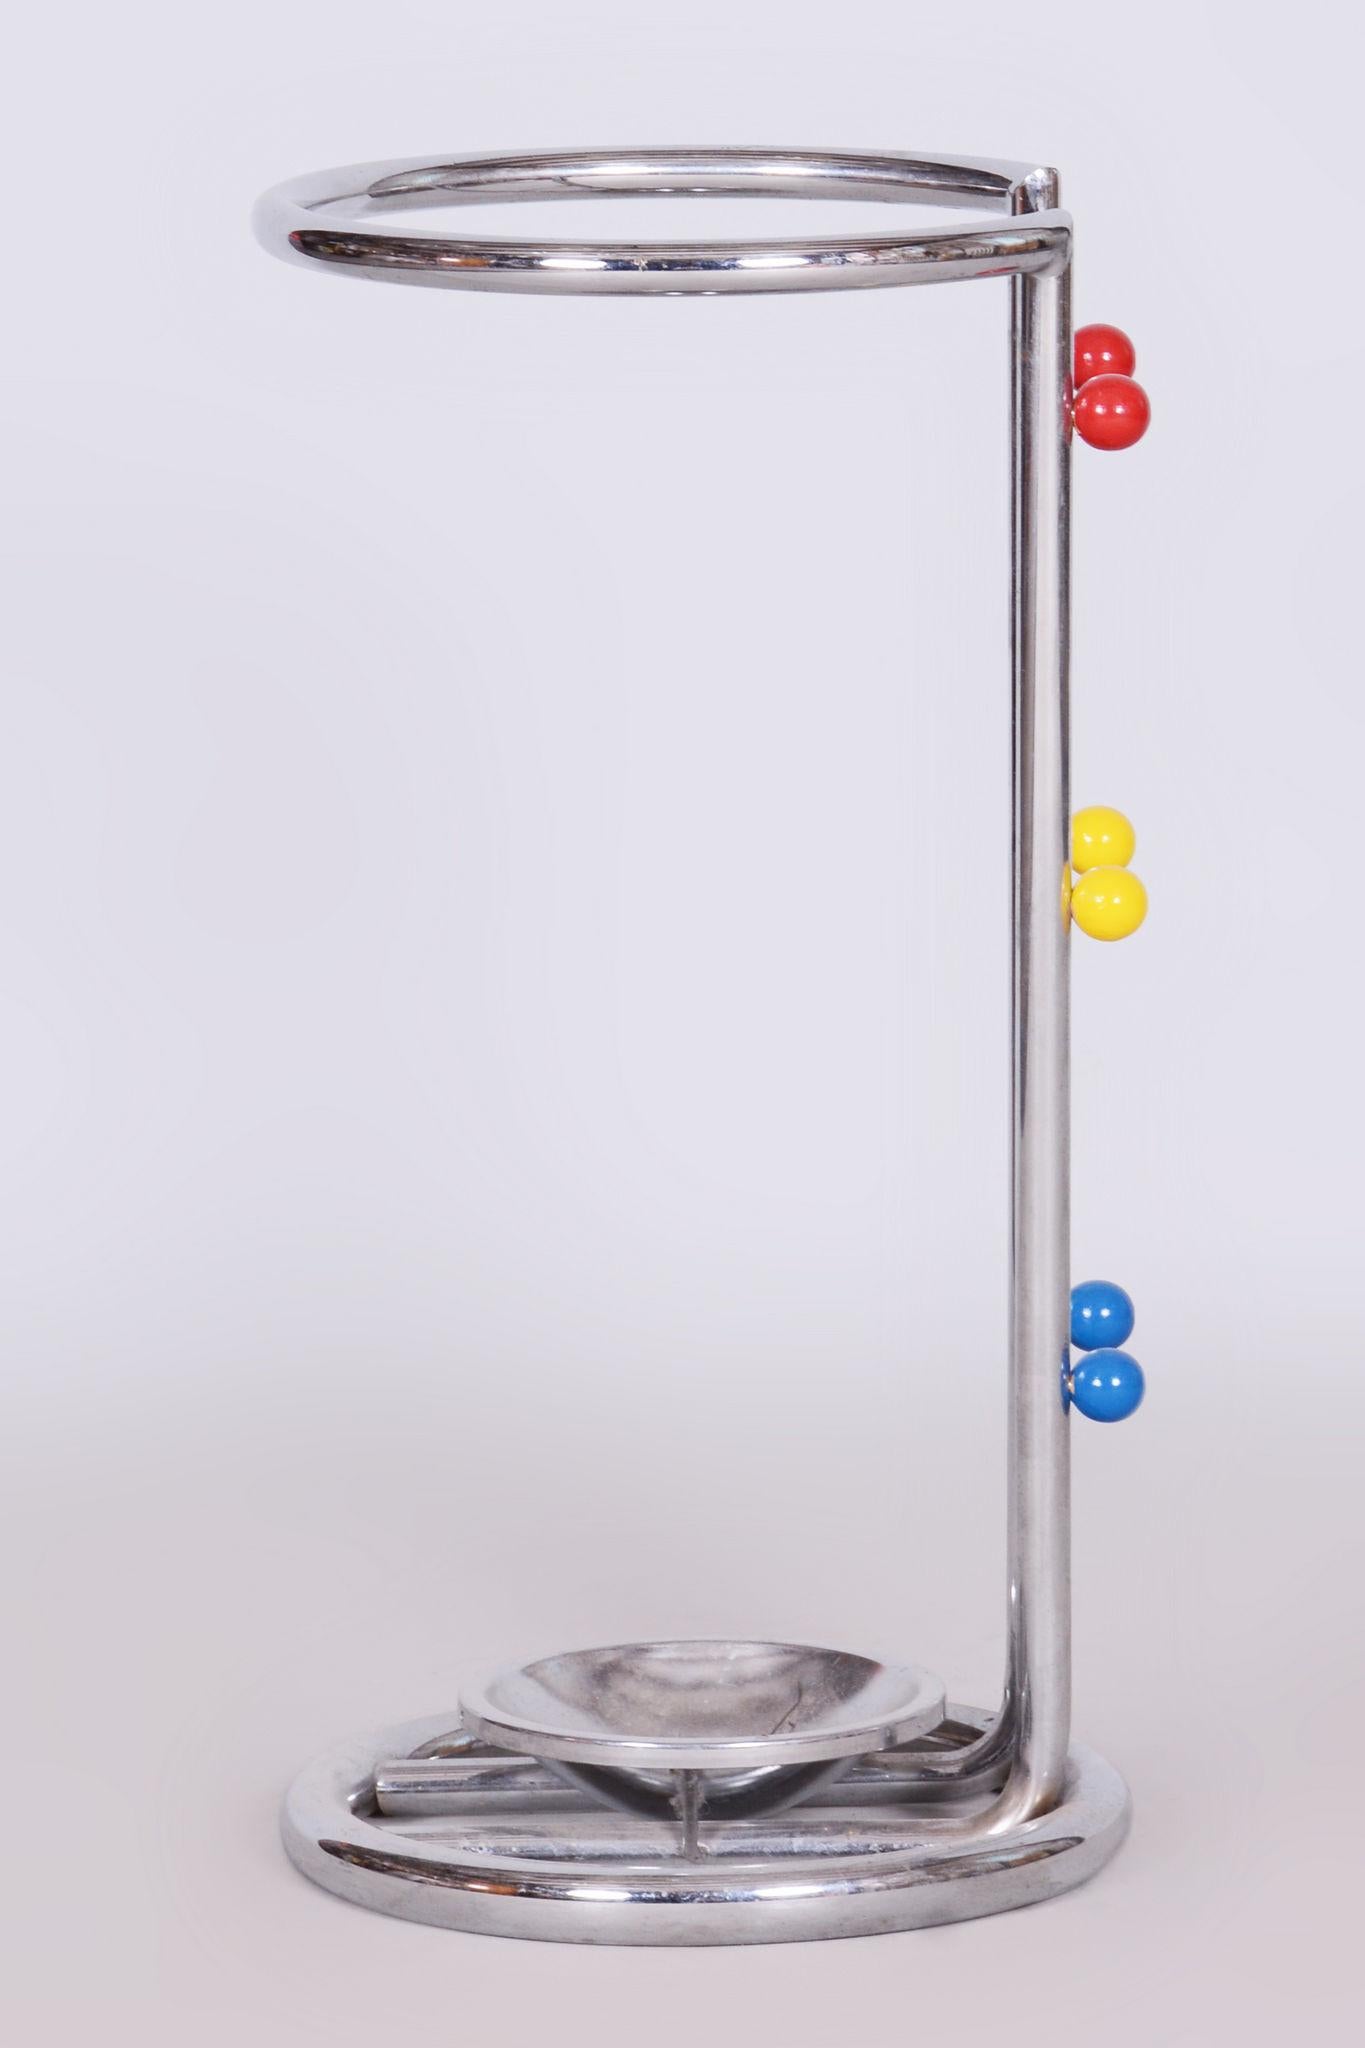 Mid-20th Century Restored Bauhaus Umbrella Stand, Chrome-Plated Steel, Germany, 1950s For Sale